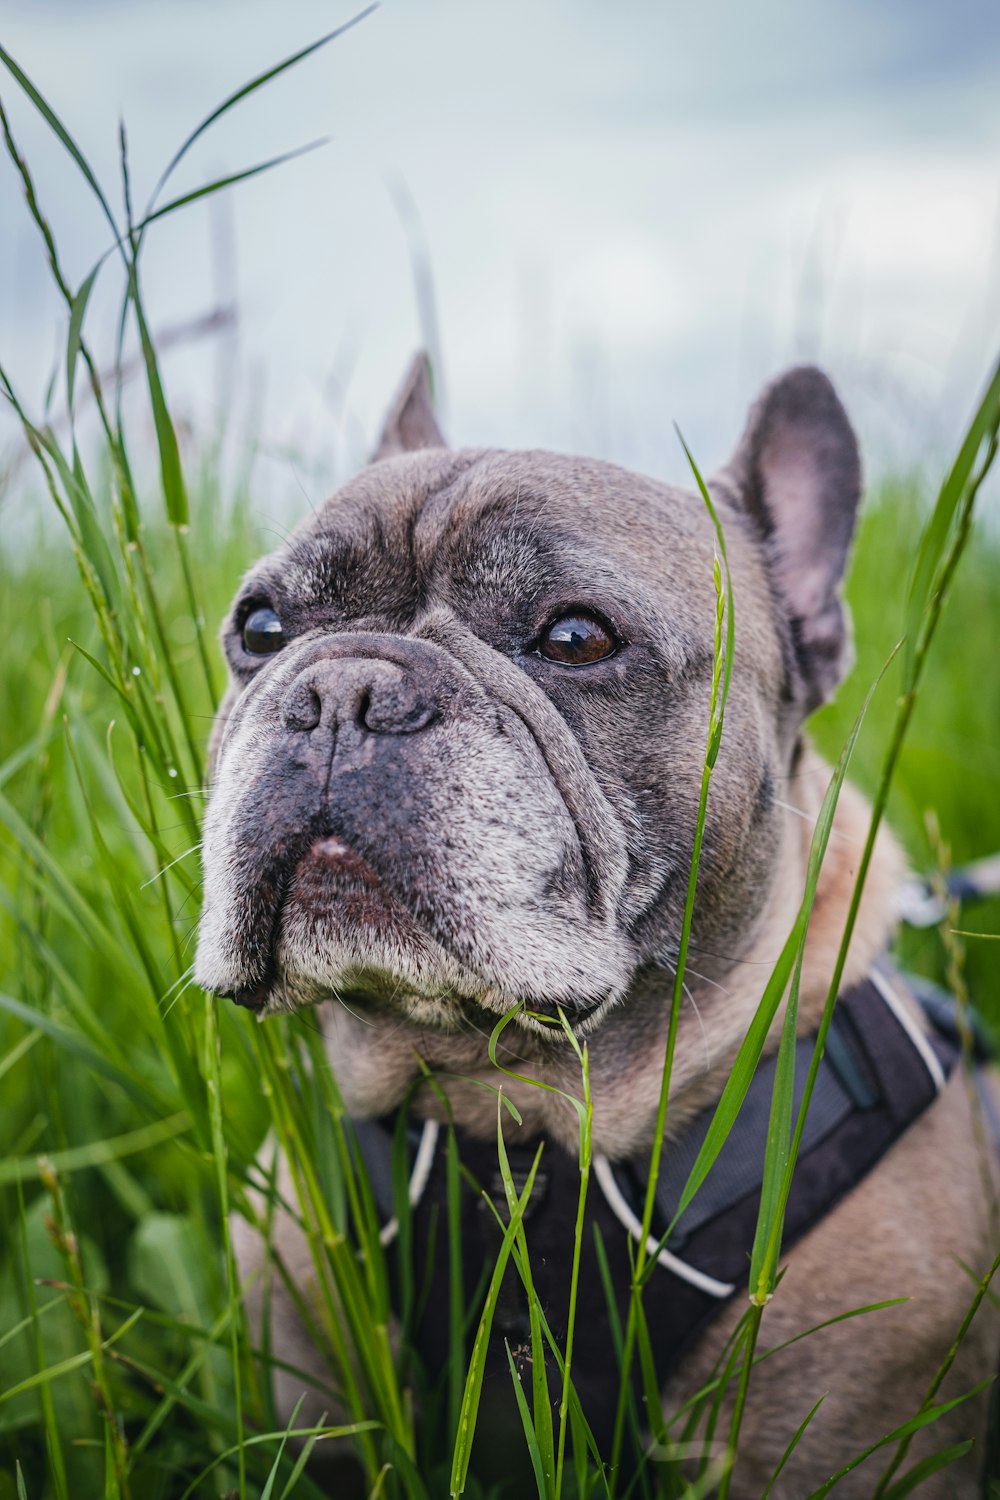 a dog in the grass